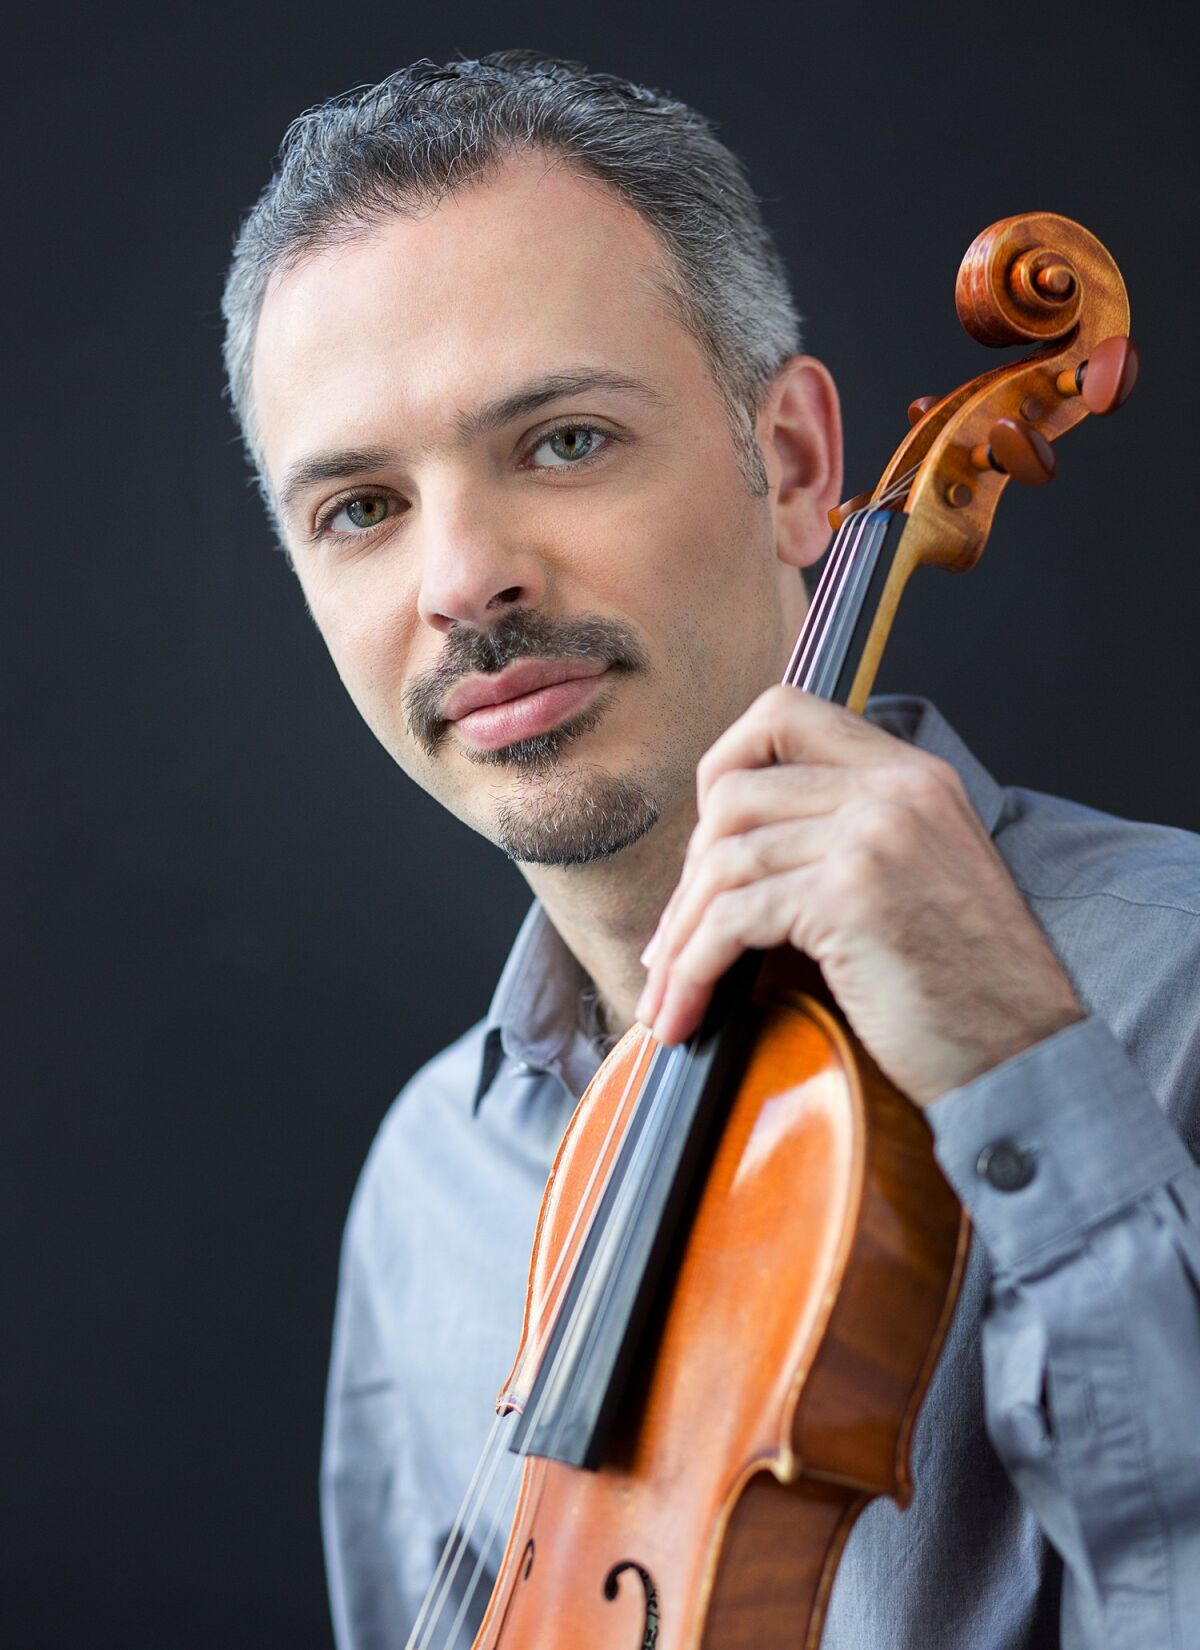 Violinist Colin Jacobsen will perform with pianist Vicky Chow on Monday, Nov. 21, at the Athenaeum Music & Arts Library.